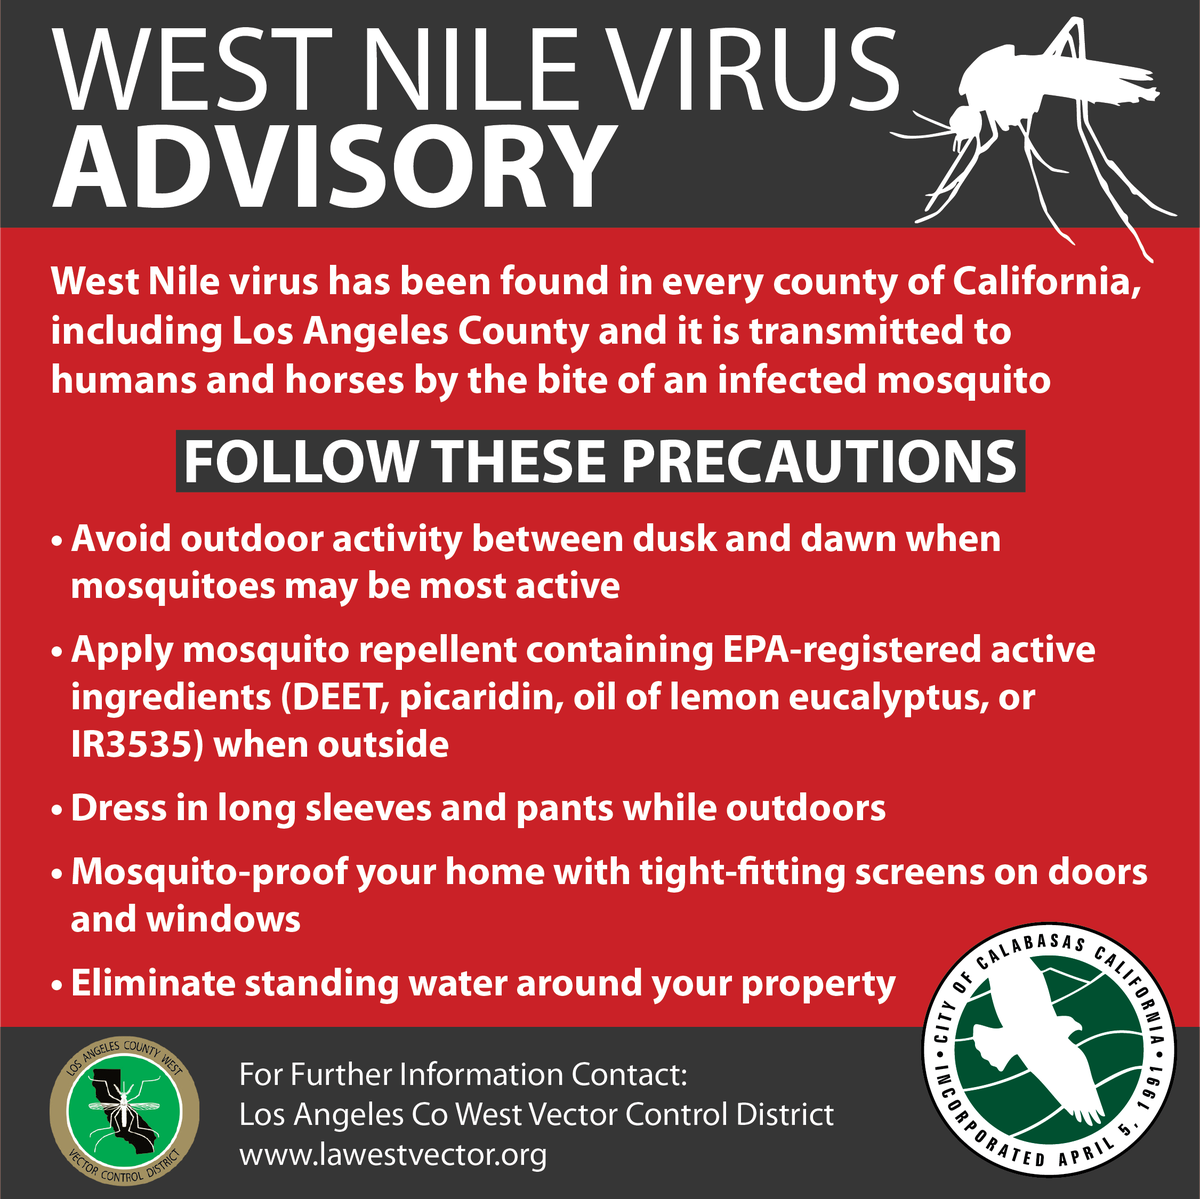 West Nile Virus is out there ... and it can be deadly. Make sure you get rid of ANY standing water in your yard. Mosquitoes won't breed unless there's standing water.